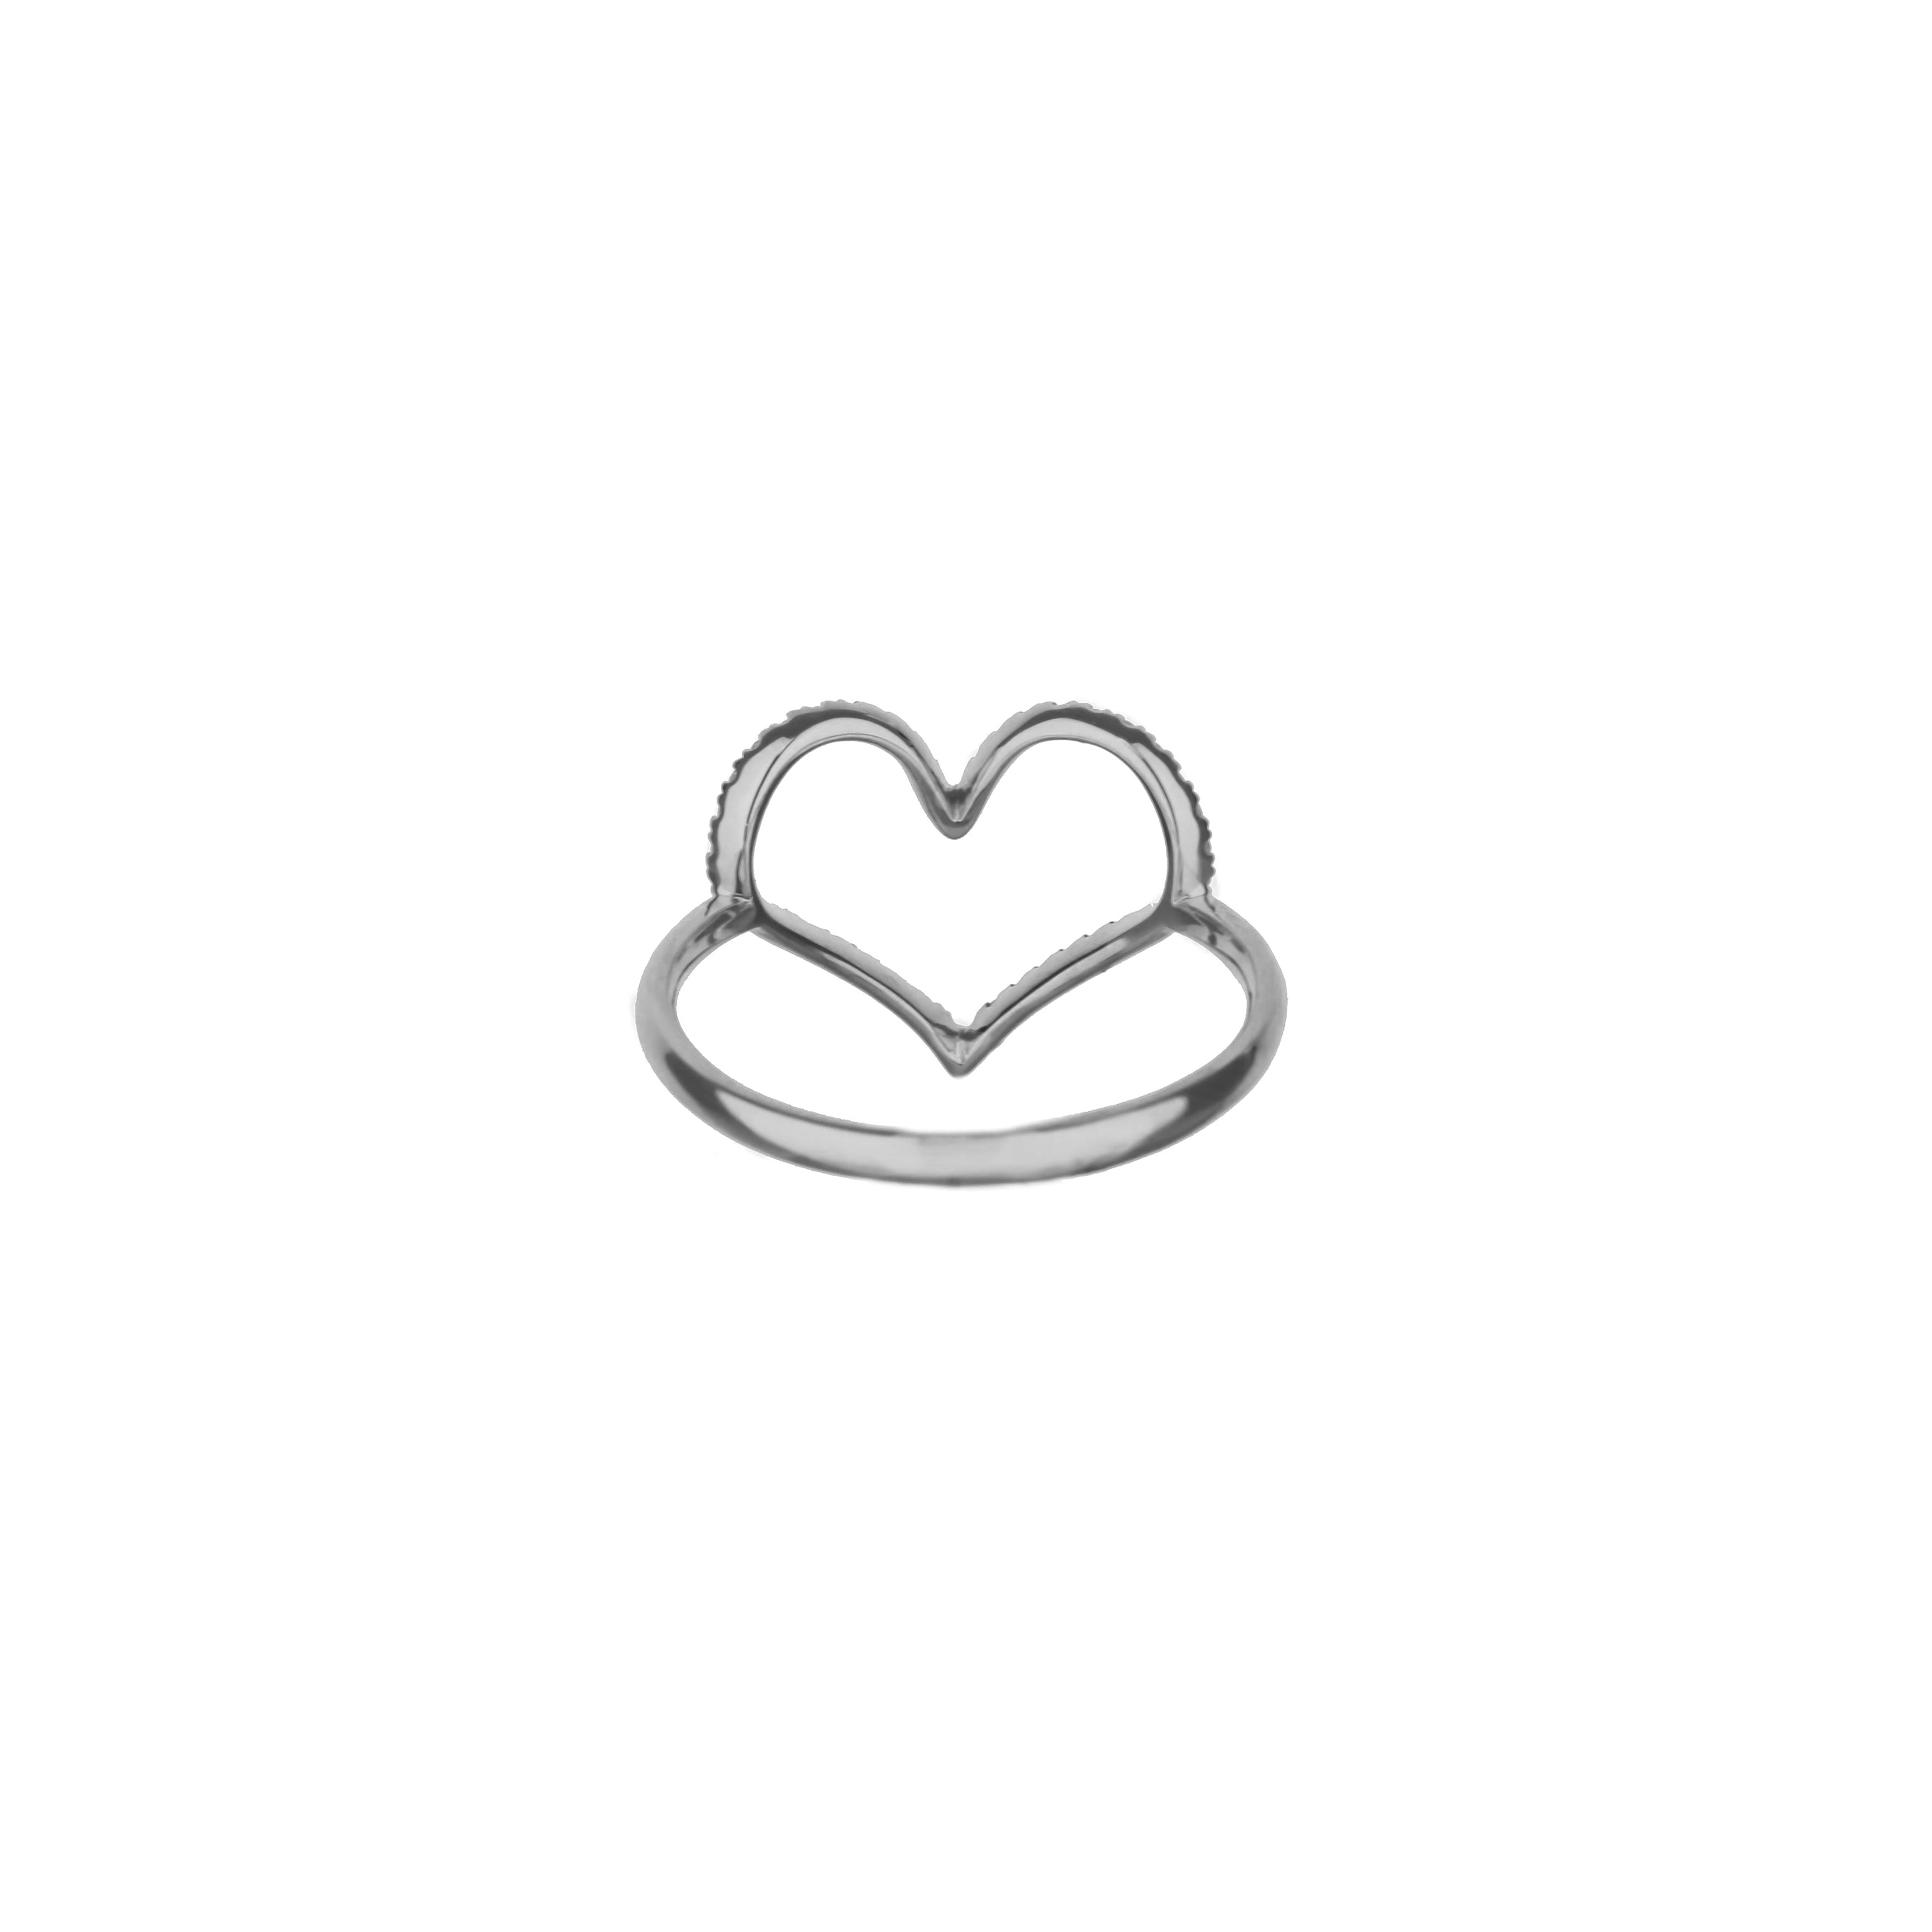 14K White Gold Open Heart Shape Ring With Prong Set Round Diamonds